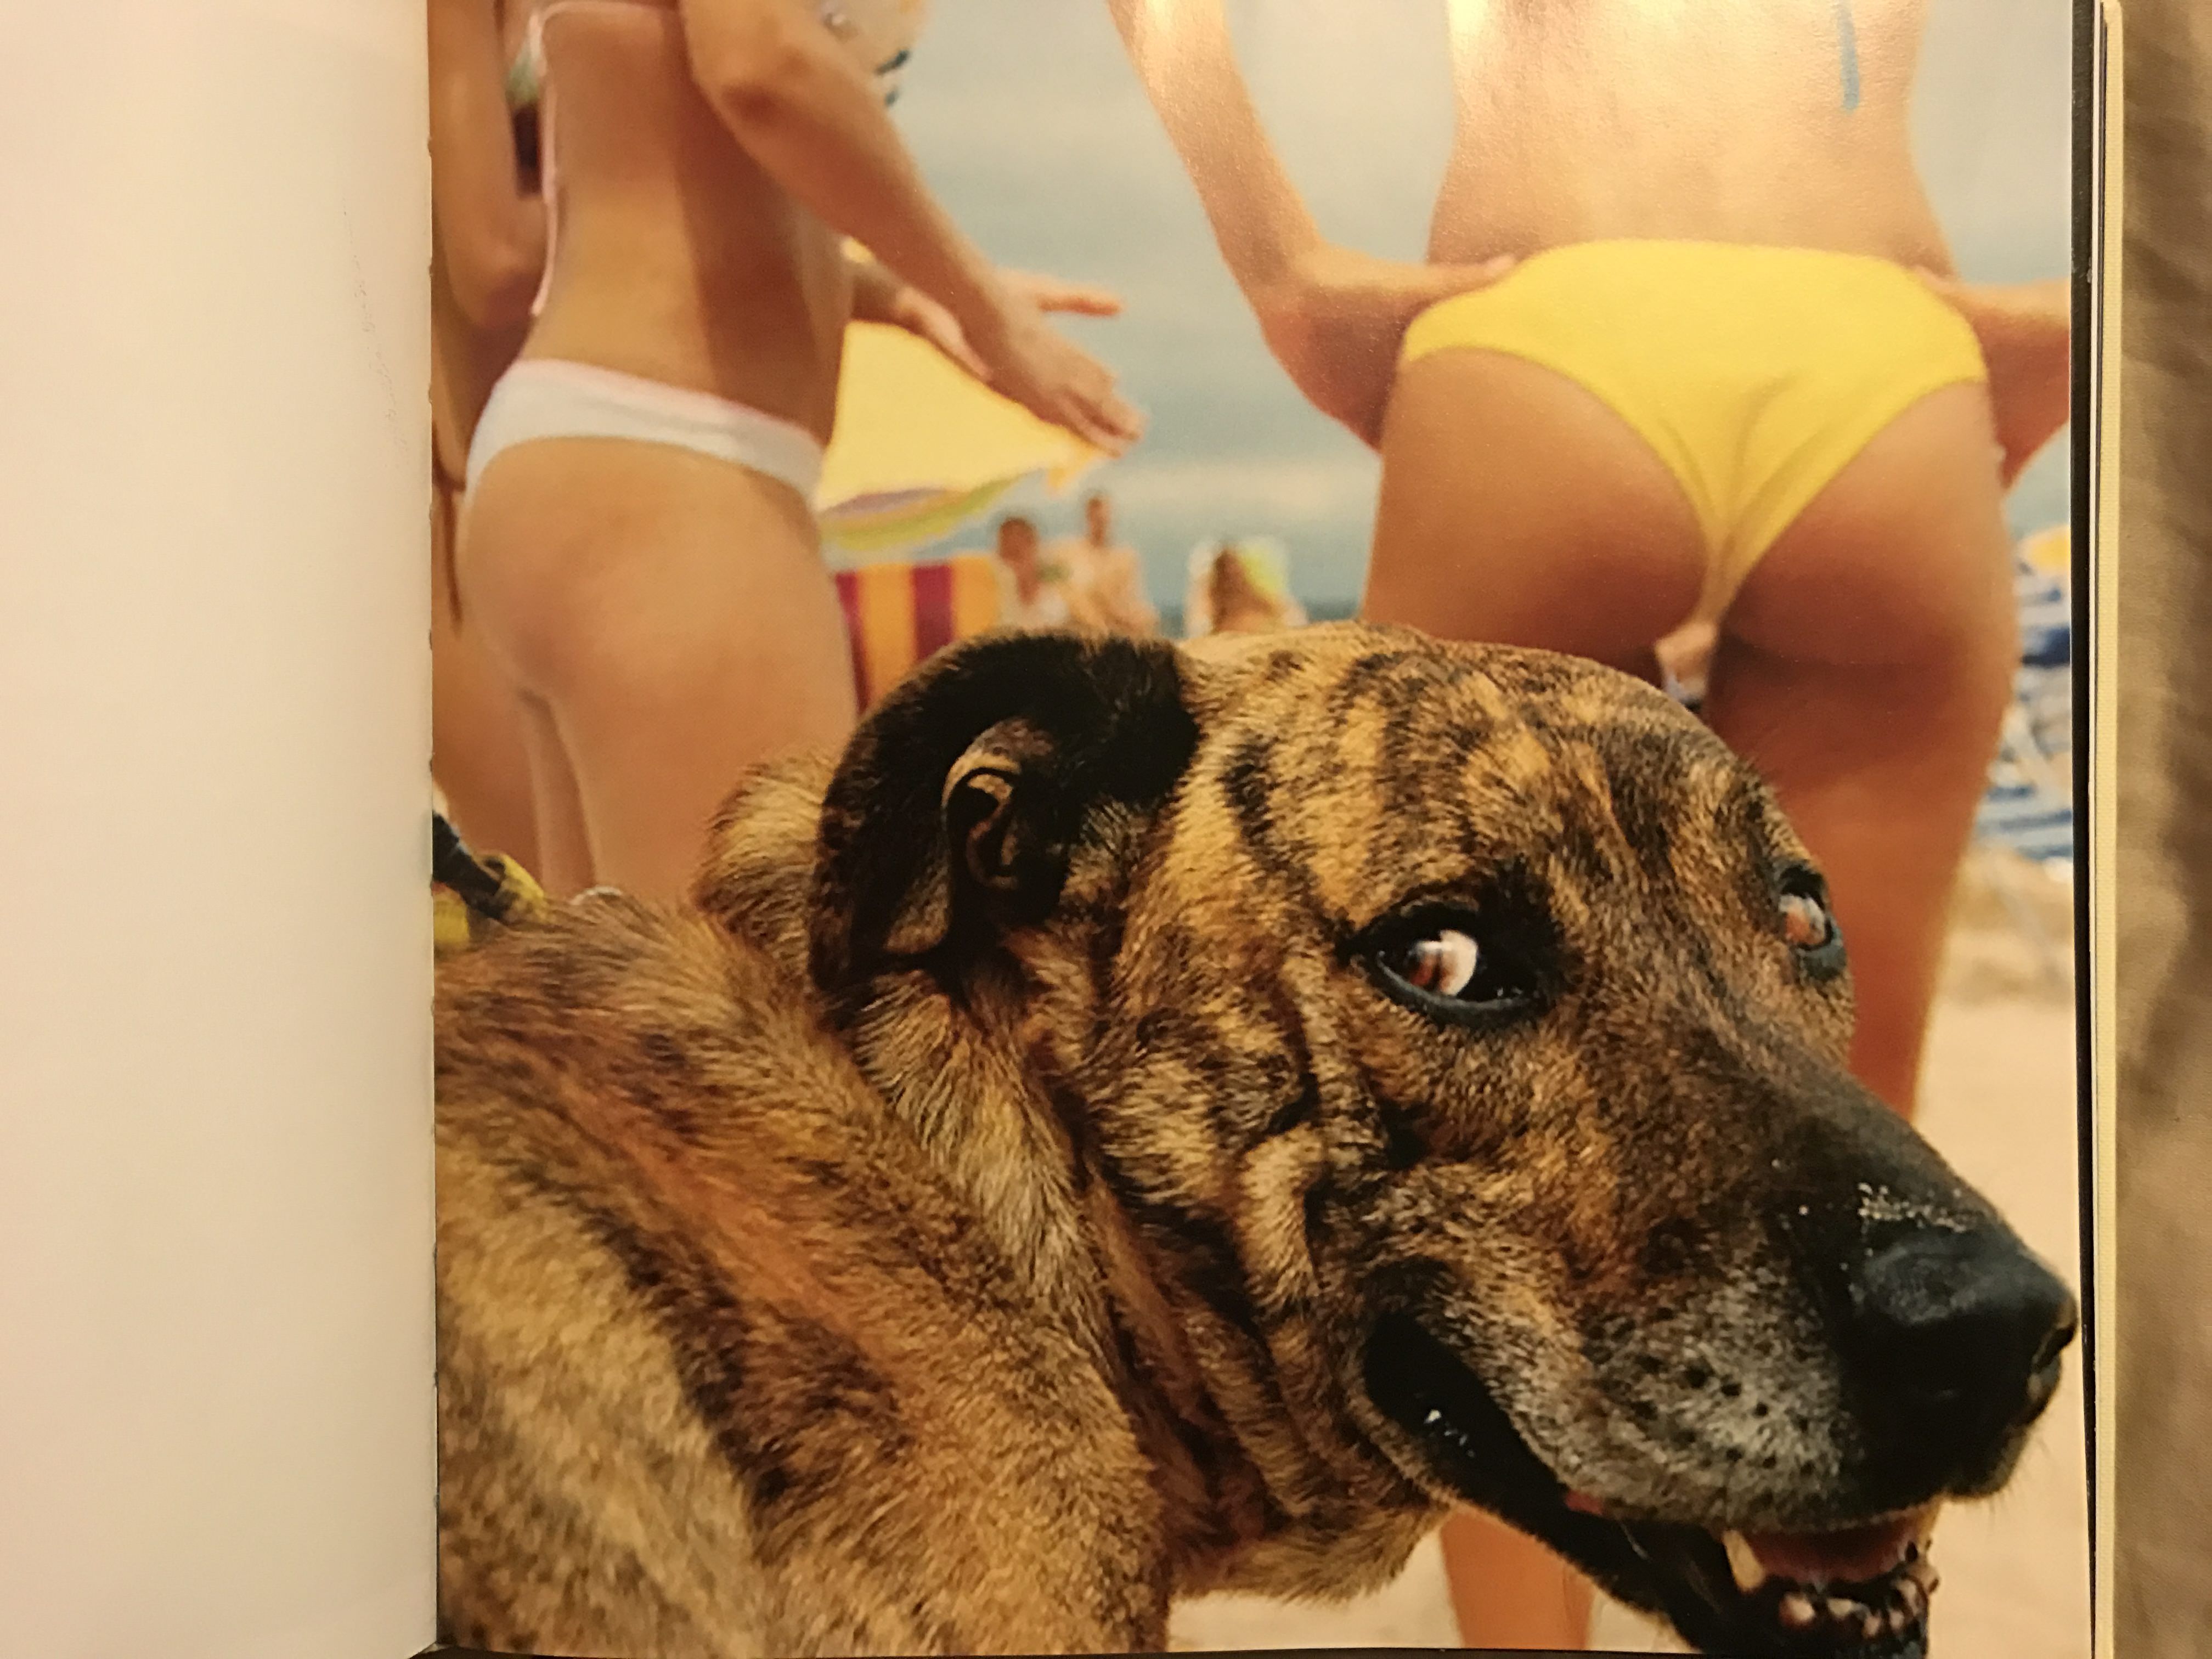 This picture of a sly dog from a National Geographic picture book.